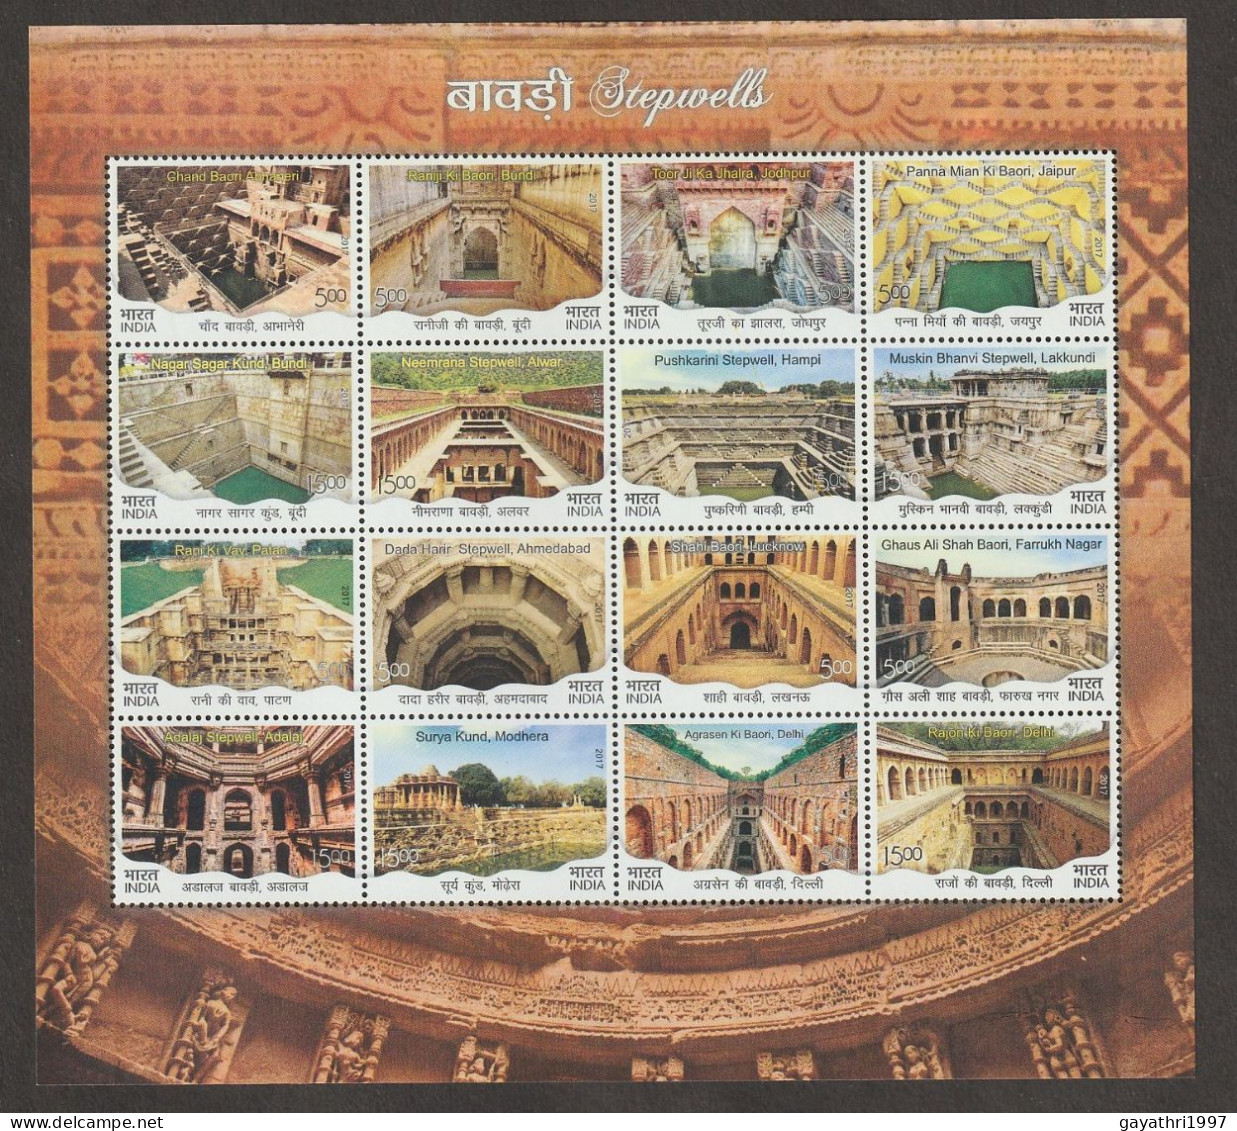 India 2017 Mixed Stepwells MINT SHEETLET Good Condition (SL-174) - Unused Stamps